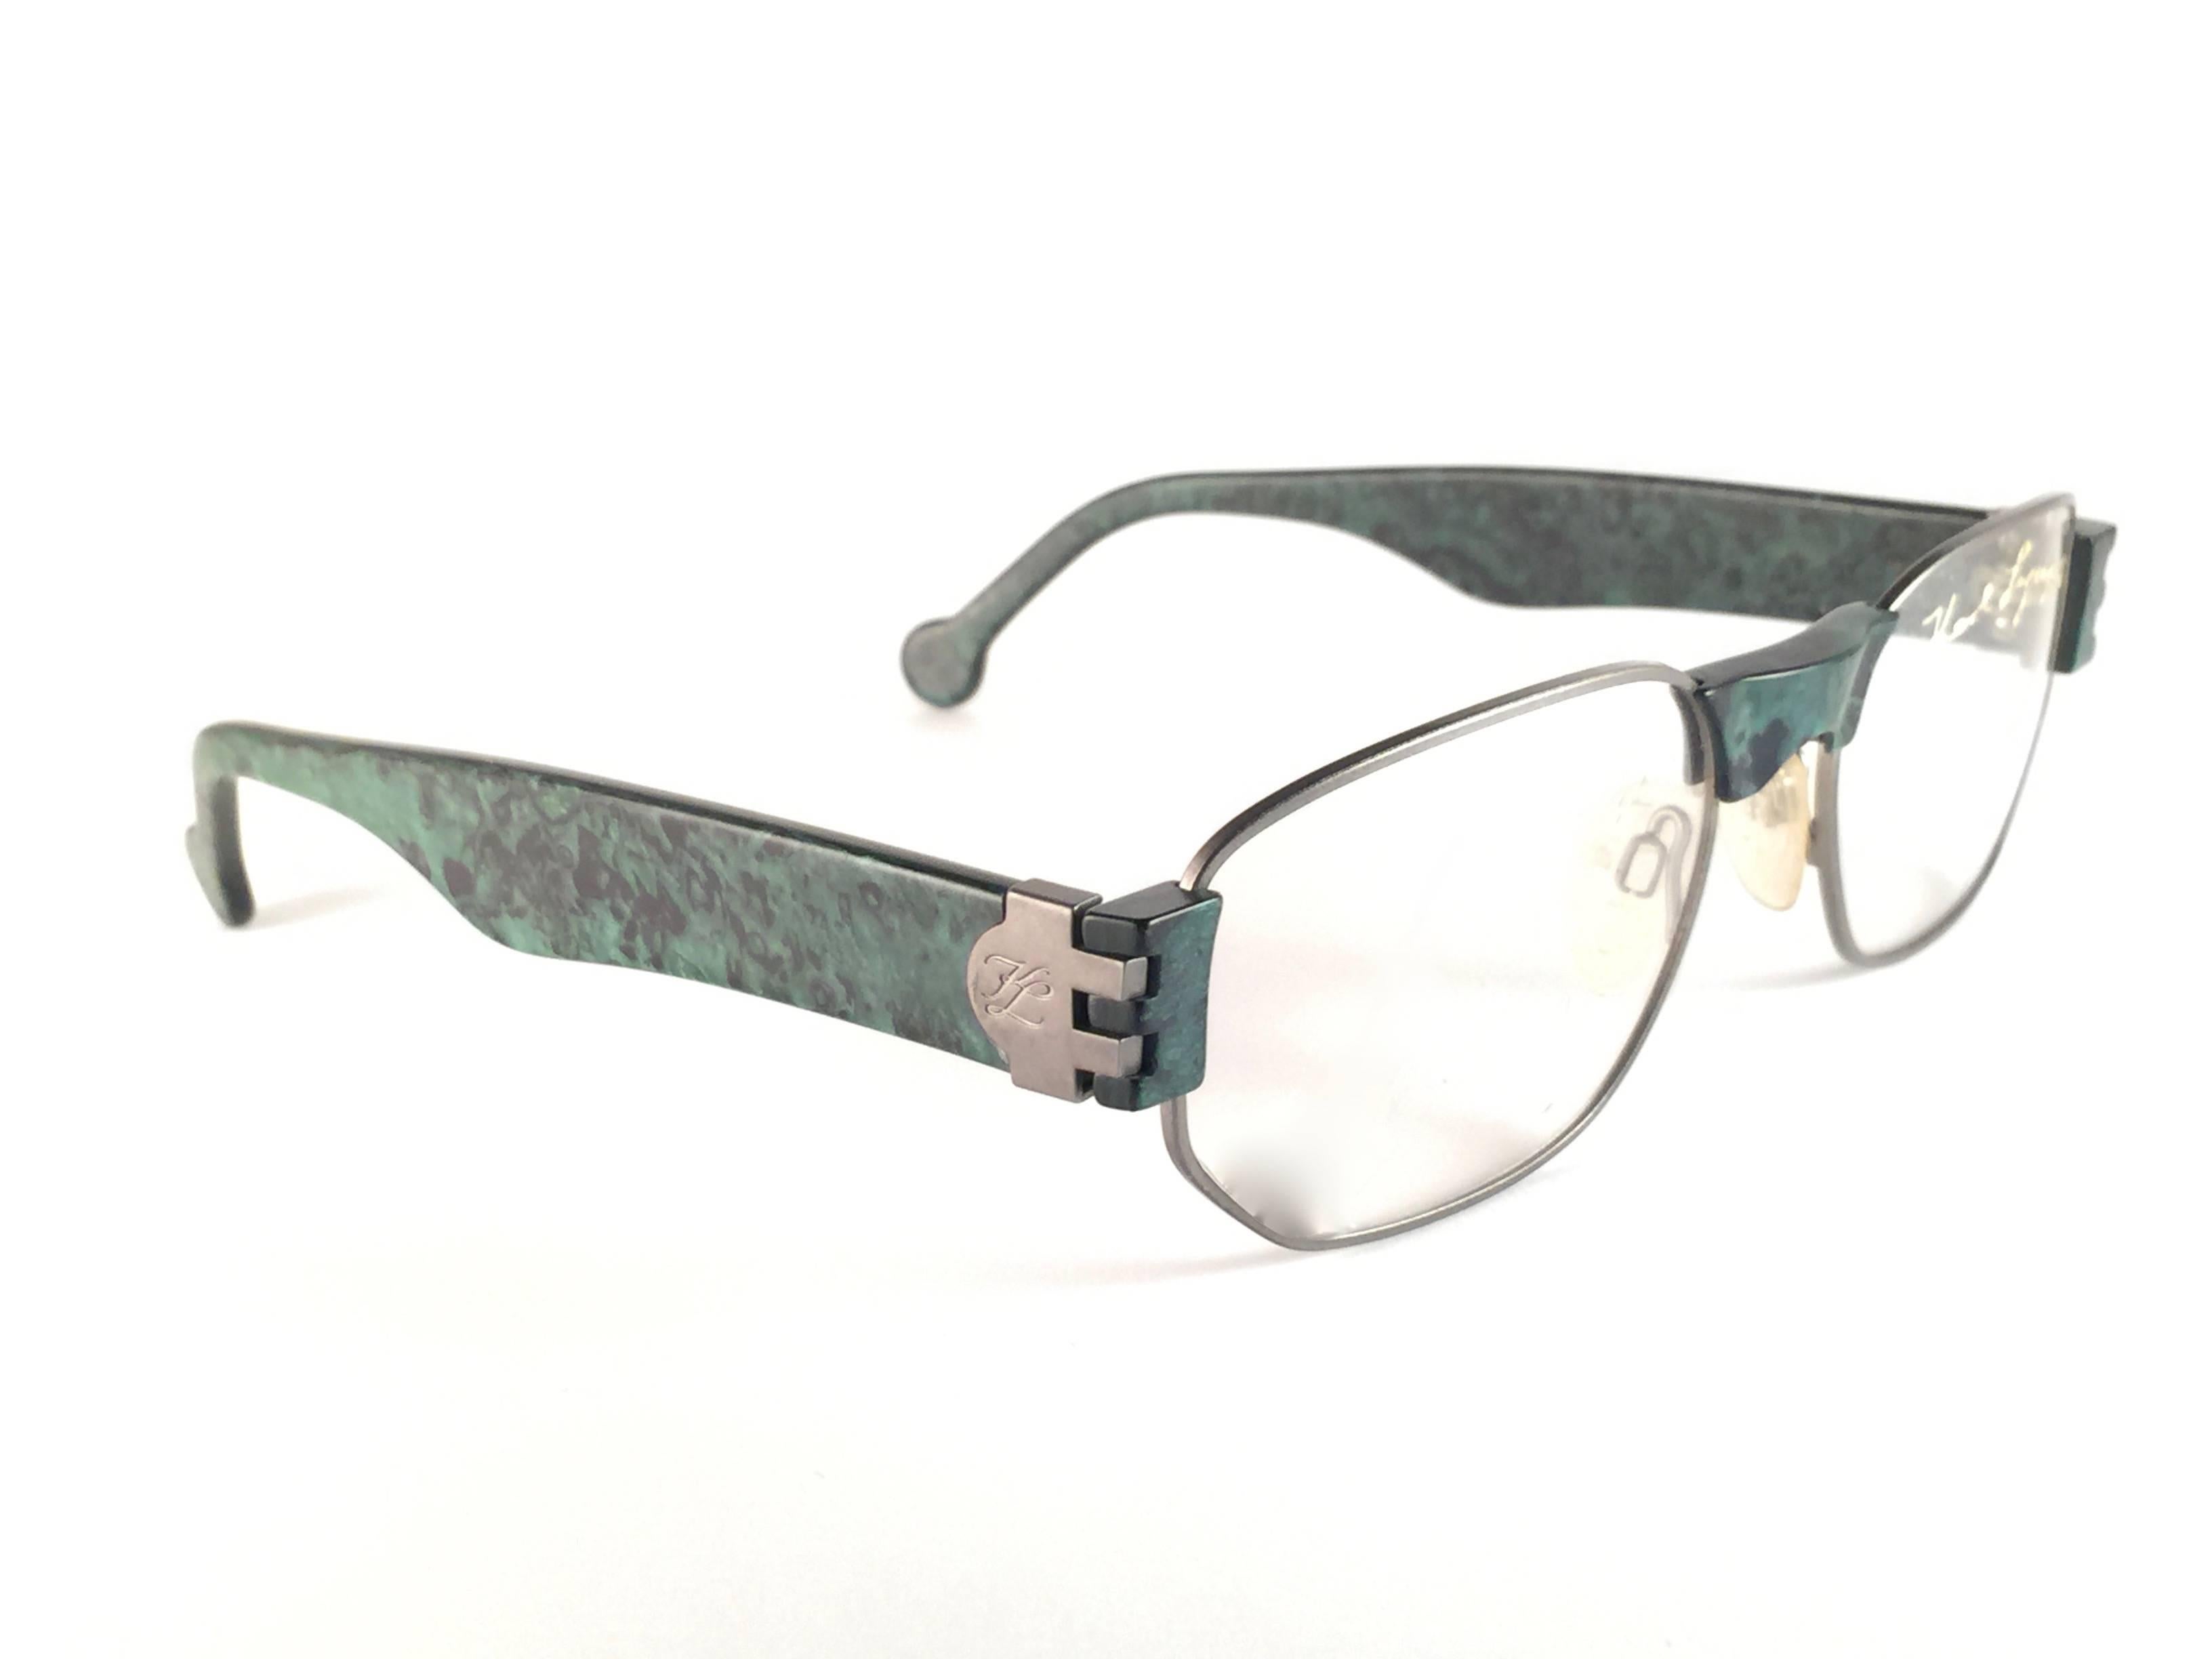 New, never worn Karl Lagerfeld marbled green frame, ready for prescription or reading lenses.

Designed and produced in 1990's. Made in Austria.